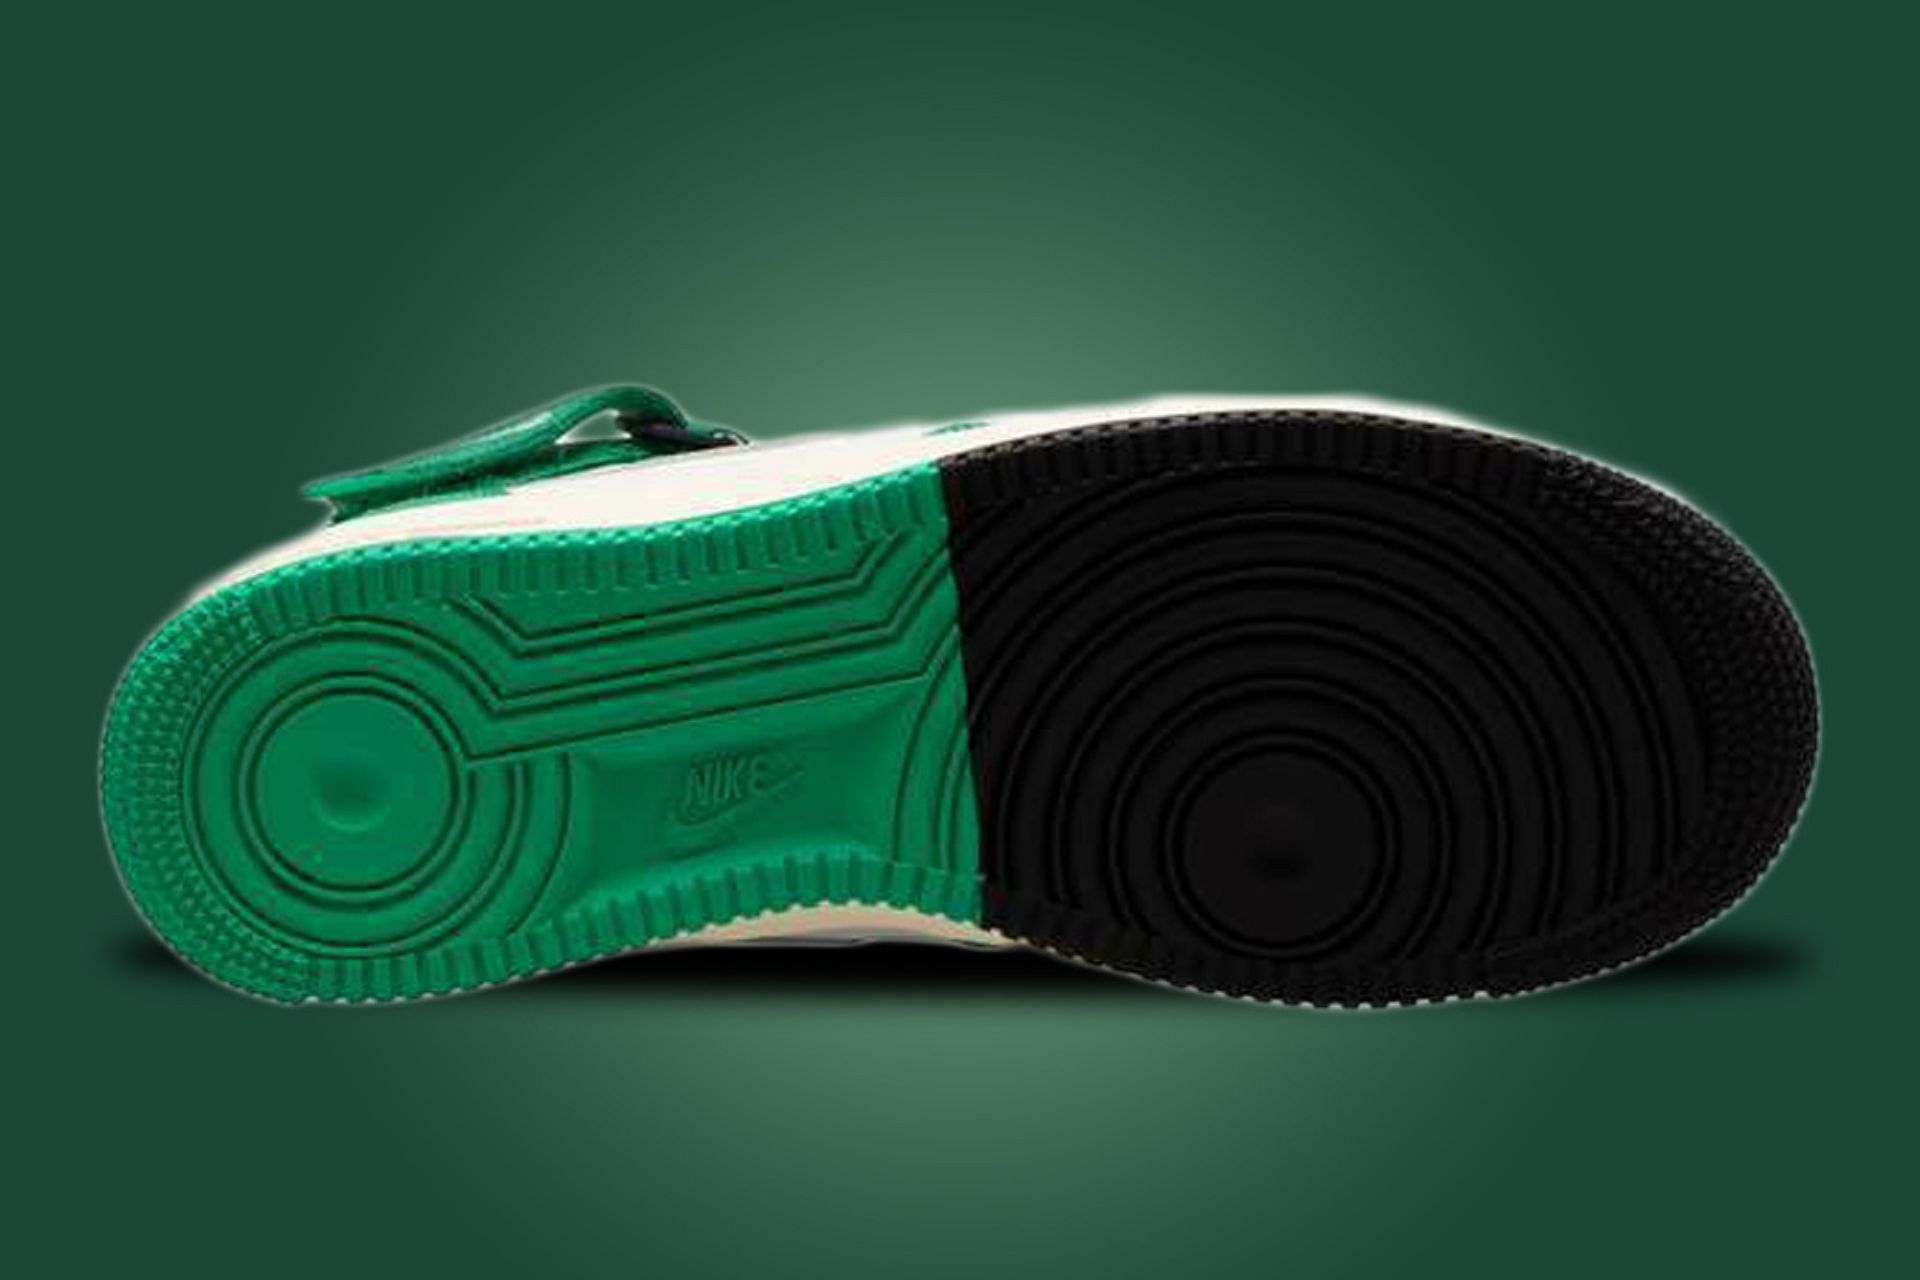 The Nike Air Force 1 Mid Split Stadium Green Releases July 15 - Sneaker News